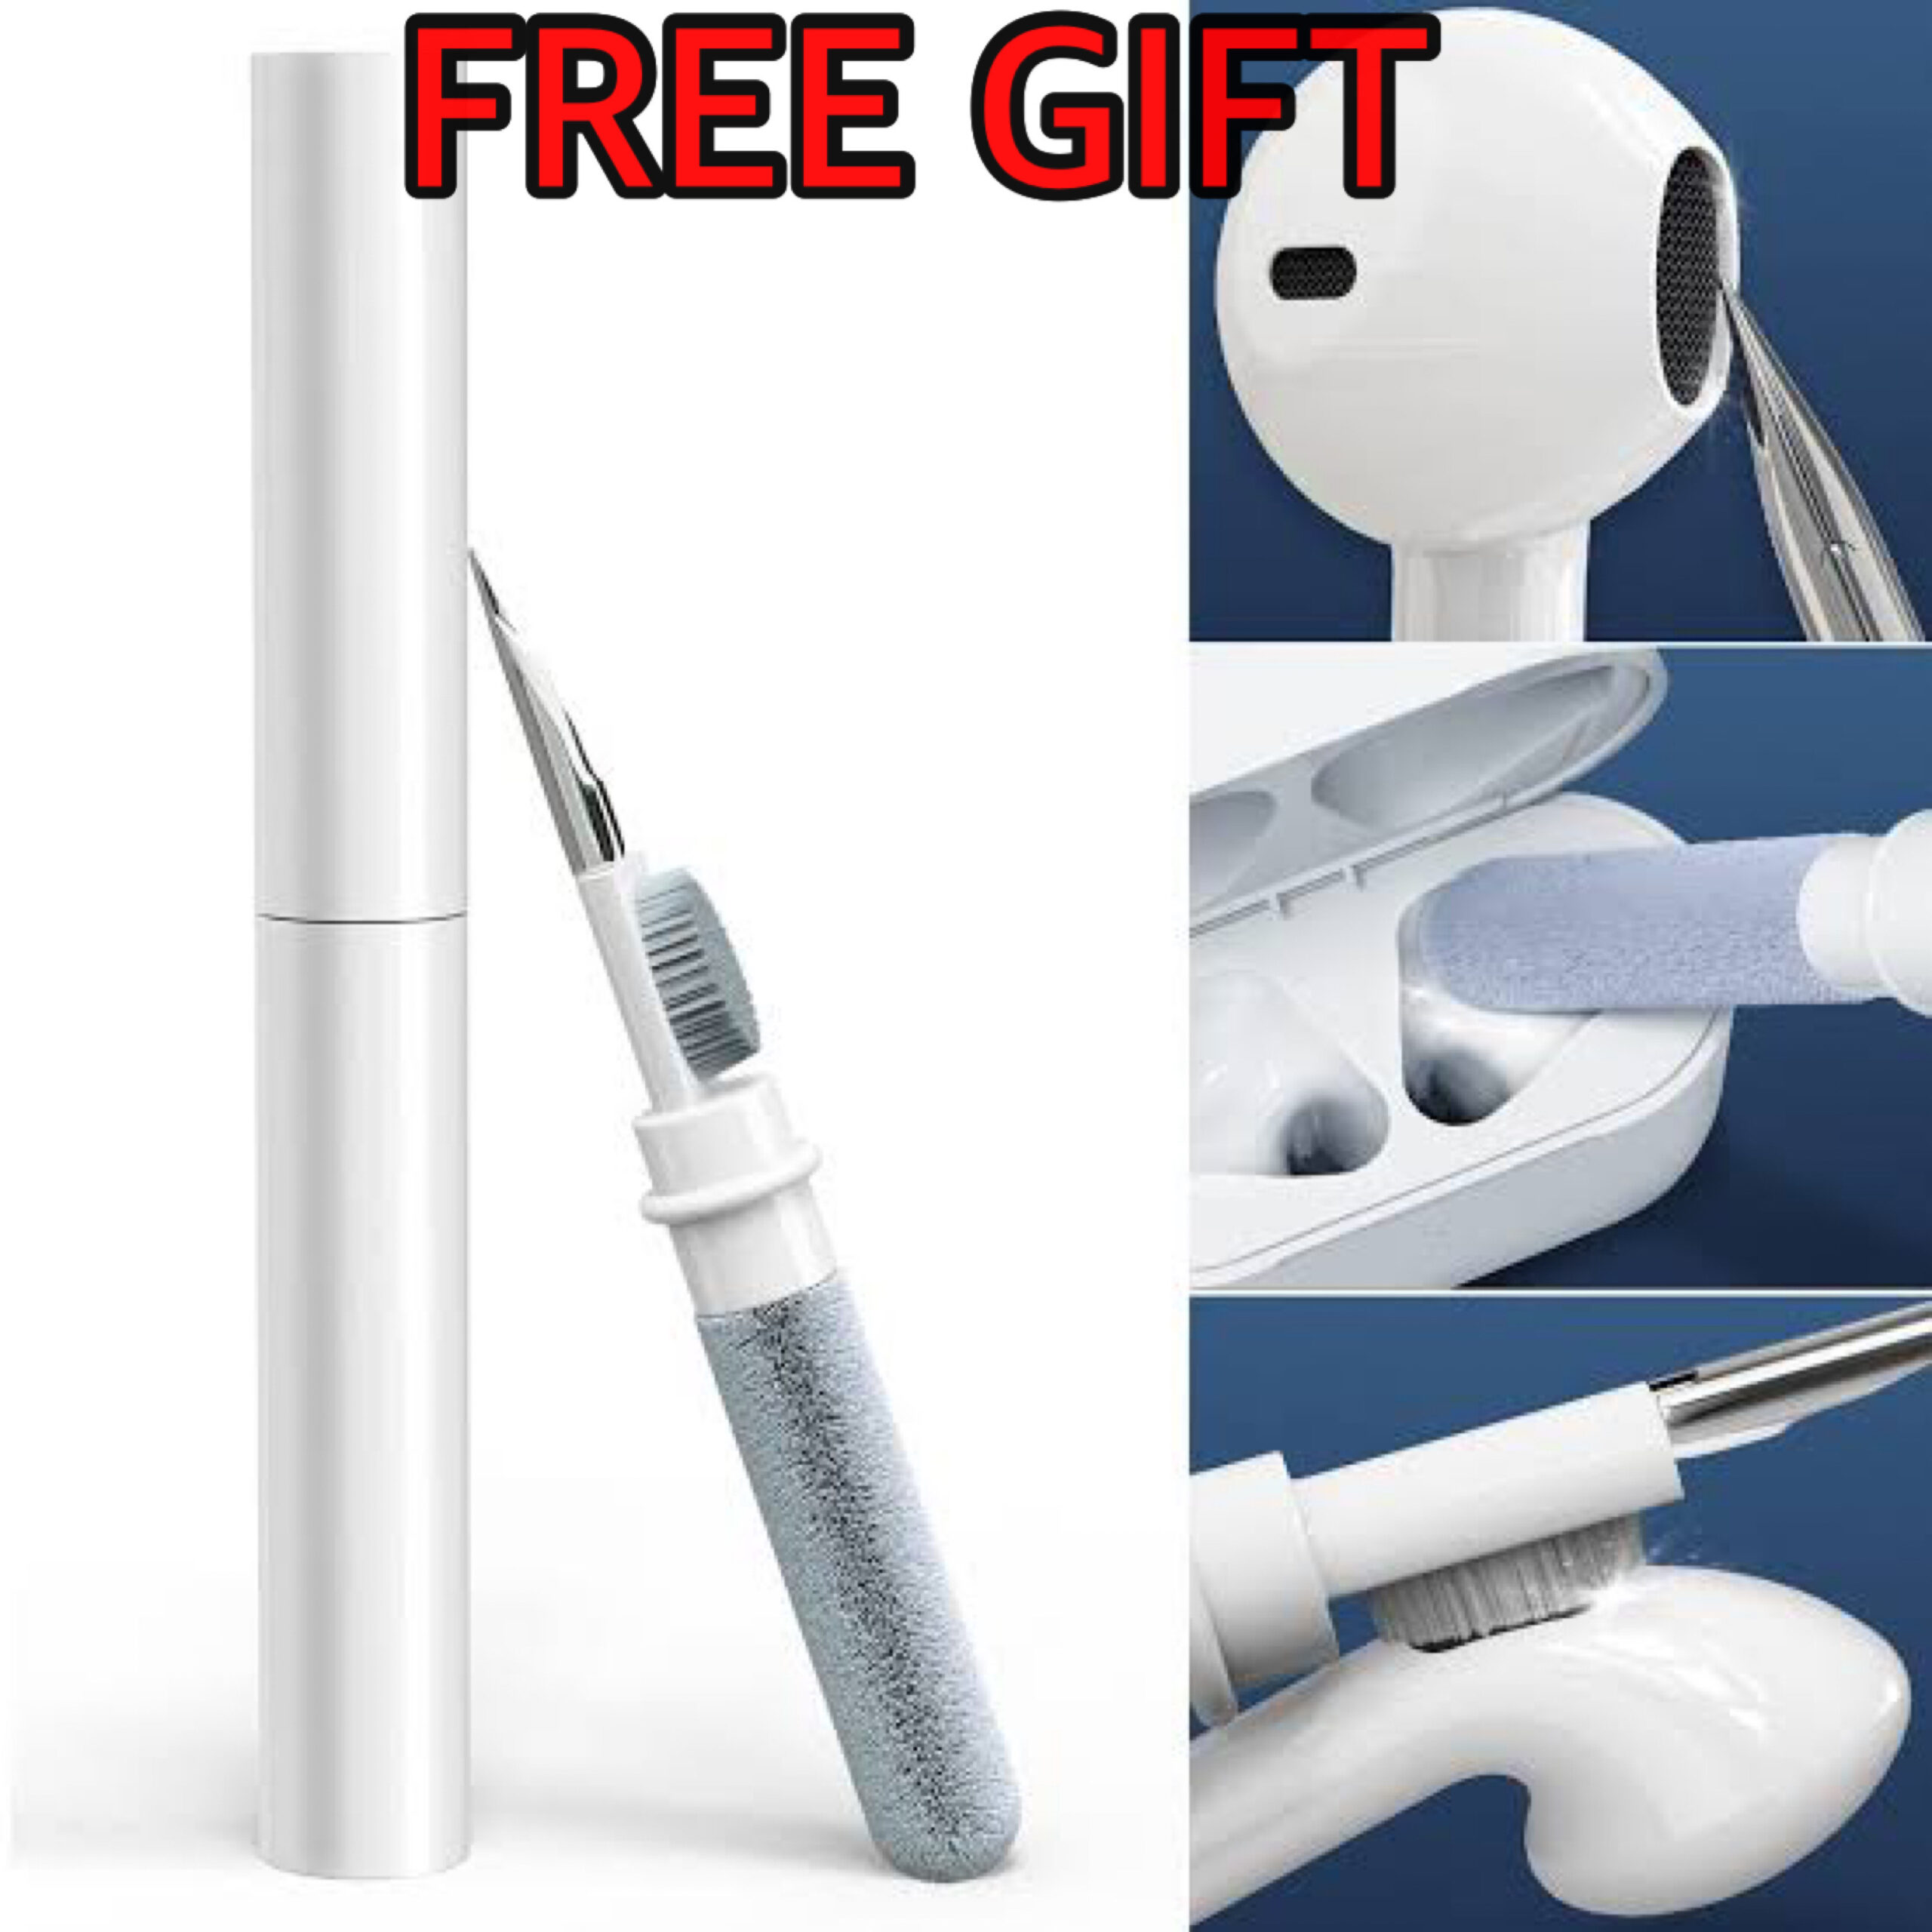 FREE AIRPOD CLEANING PEN!